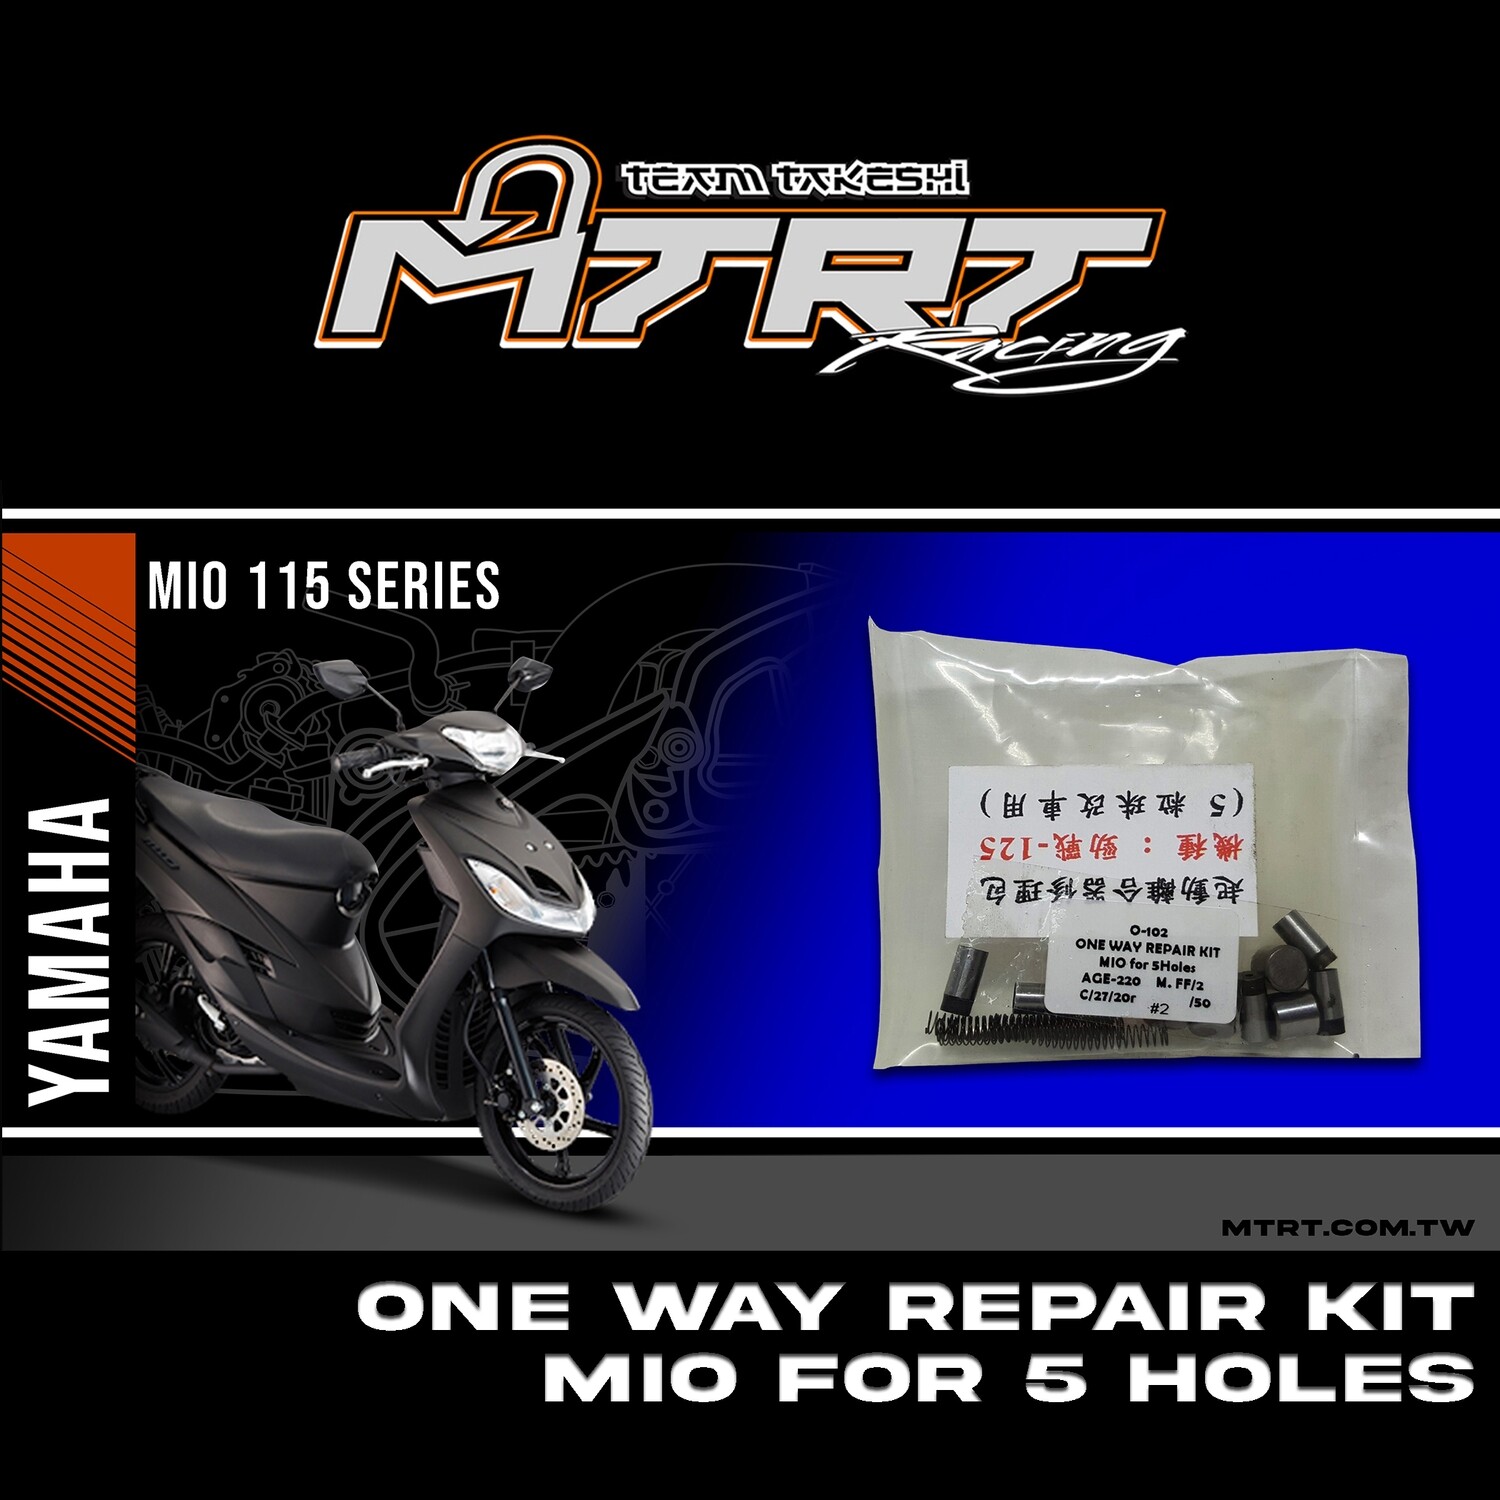 ONE WAY REPAIR KIT MIO FOR 5 HOLES